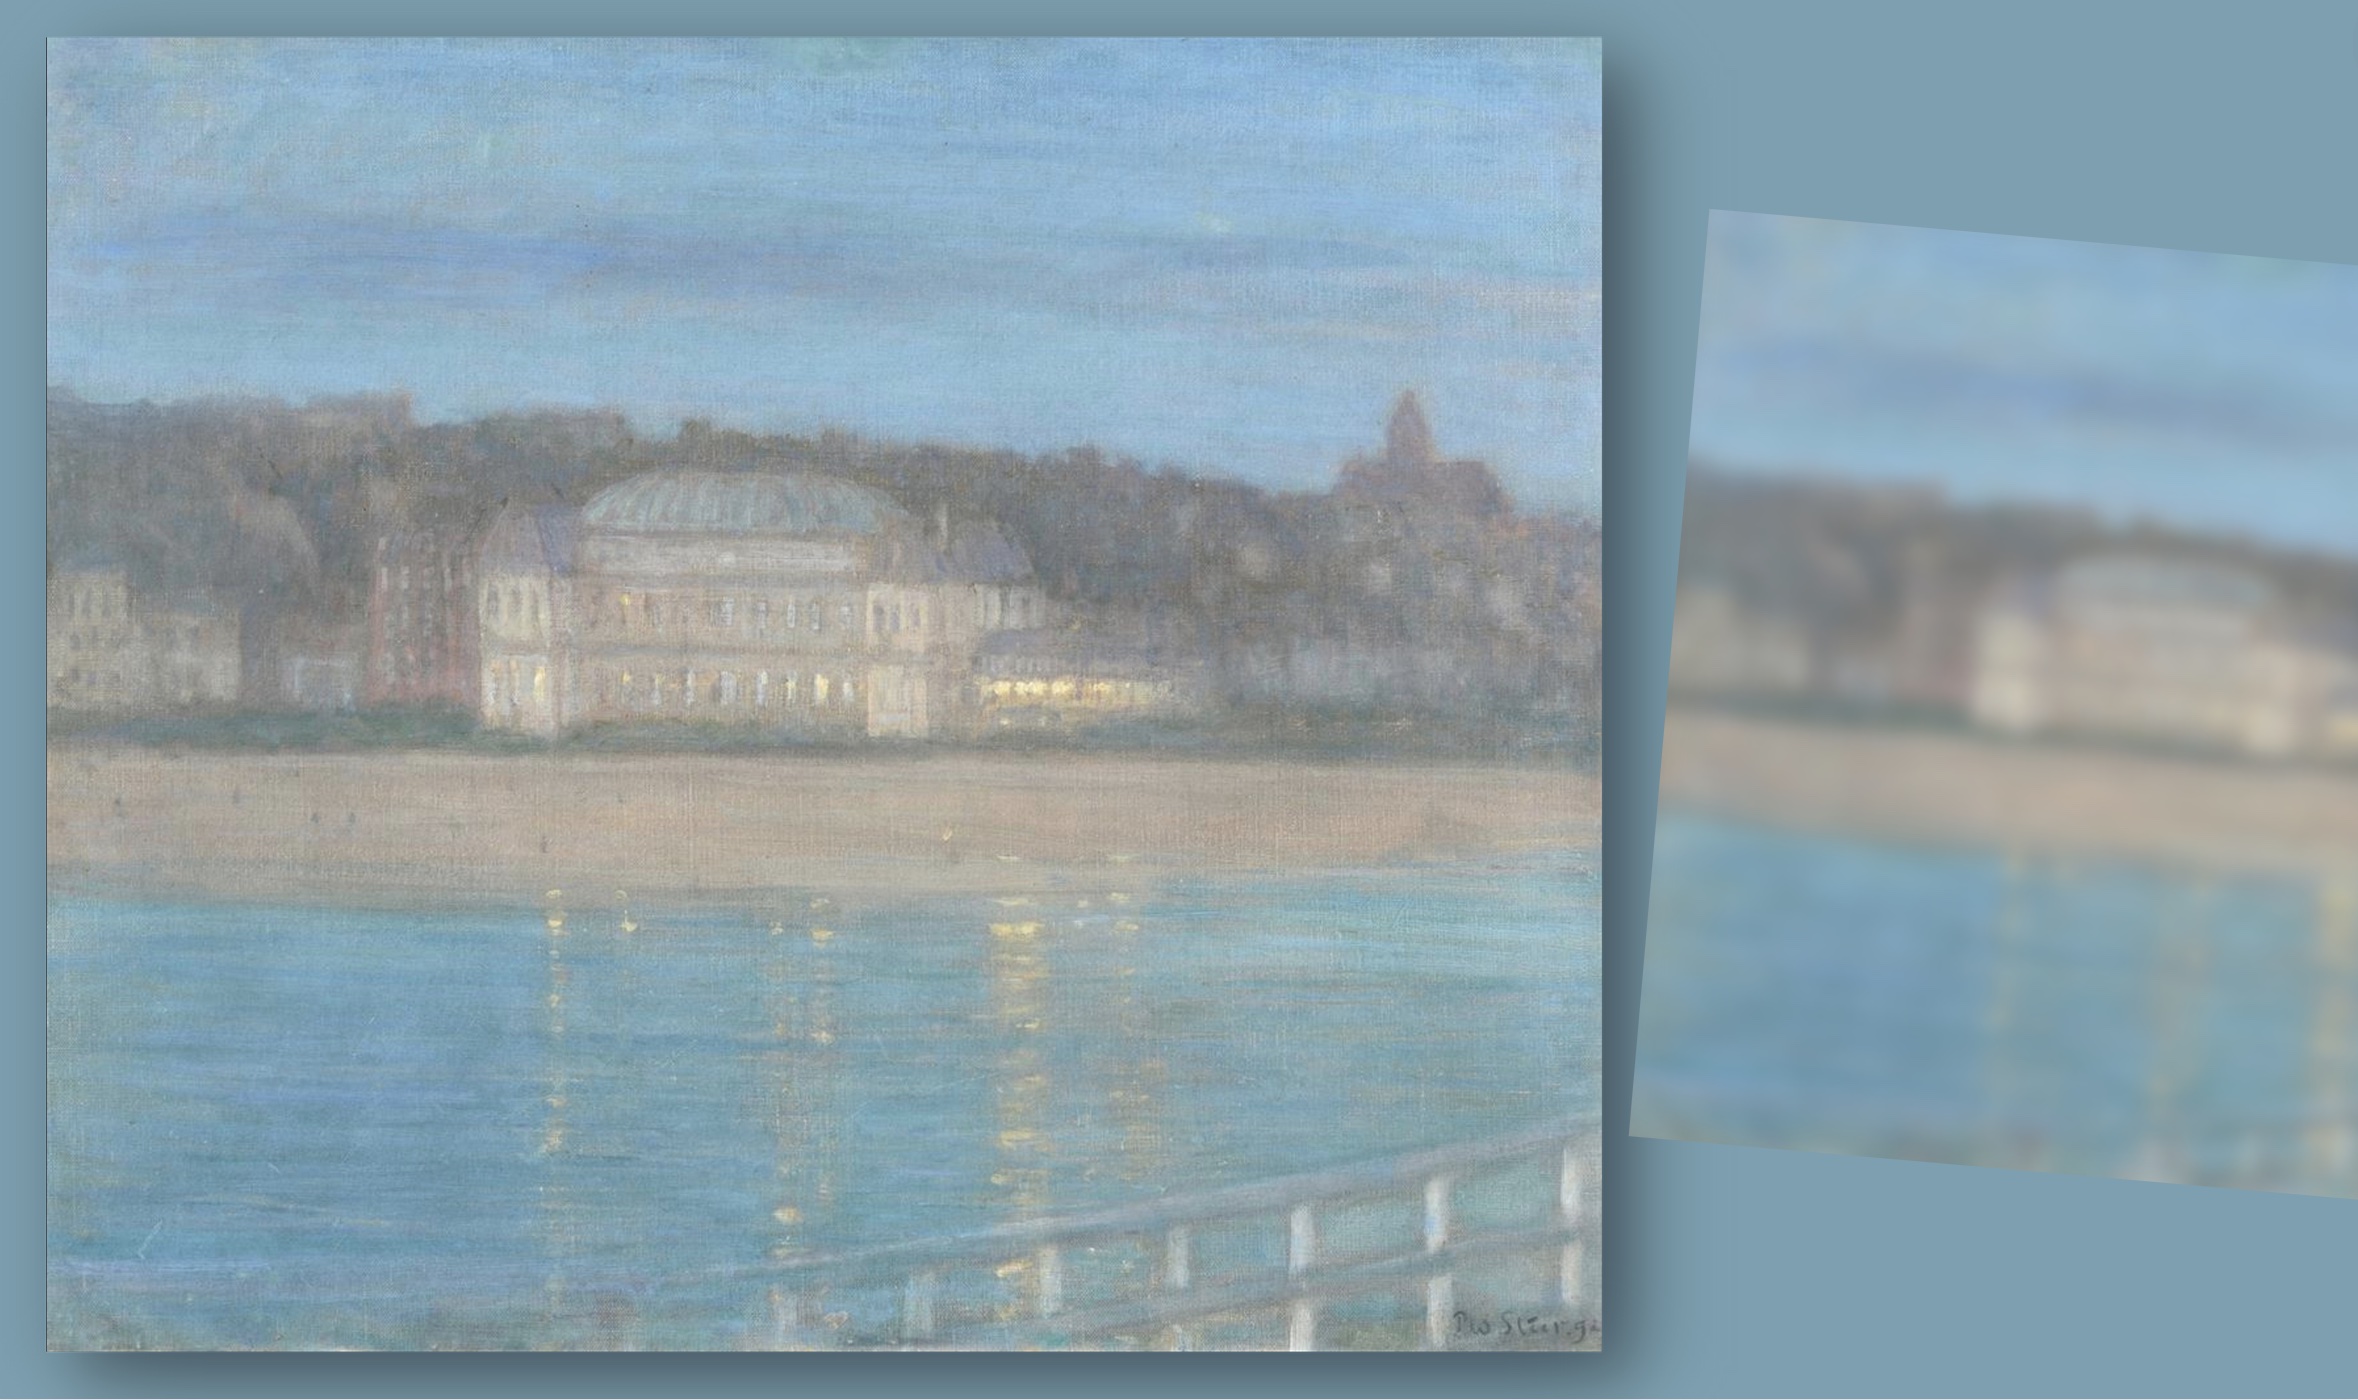 Rare Philip Wilson Steer painting in Berkshire sale – Antique Collecting